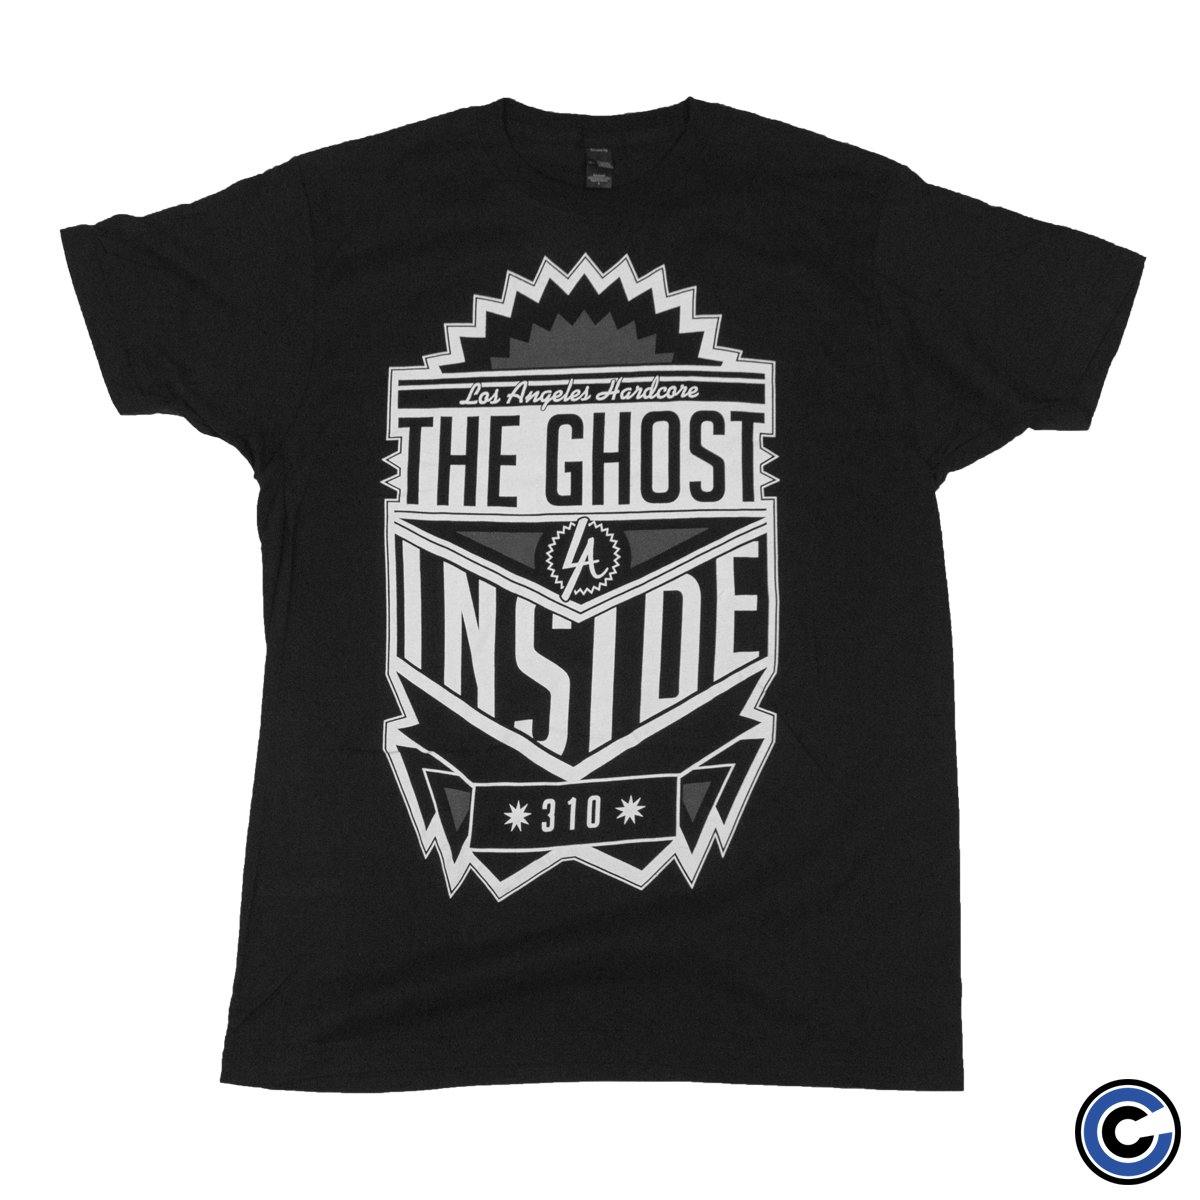 Buy – The Ghost Inside "310 Kings" Shirt – Band & Music Merch – Cold Cuts Merch